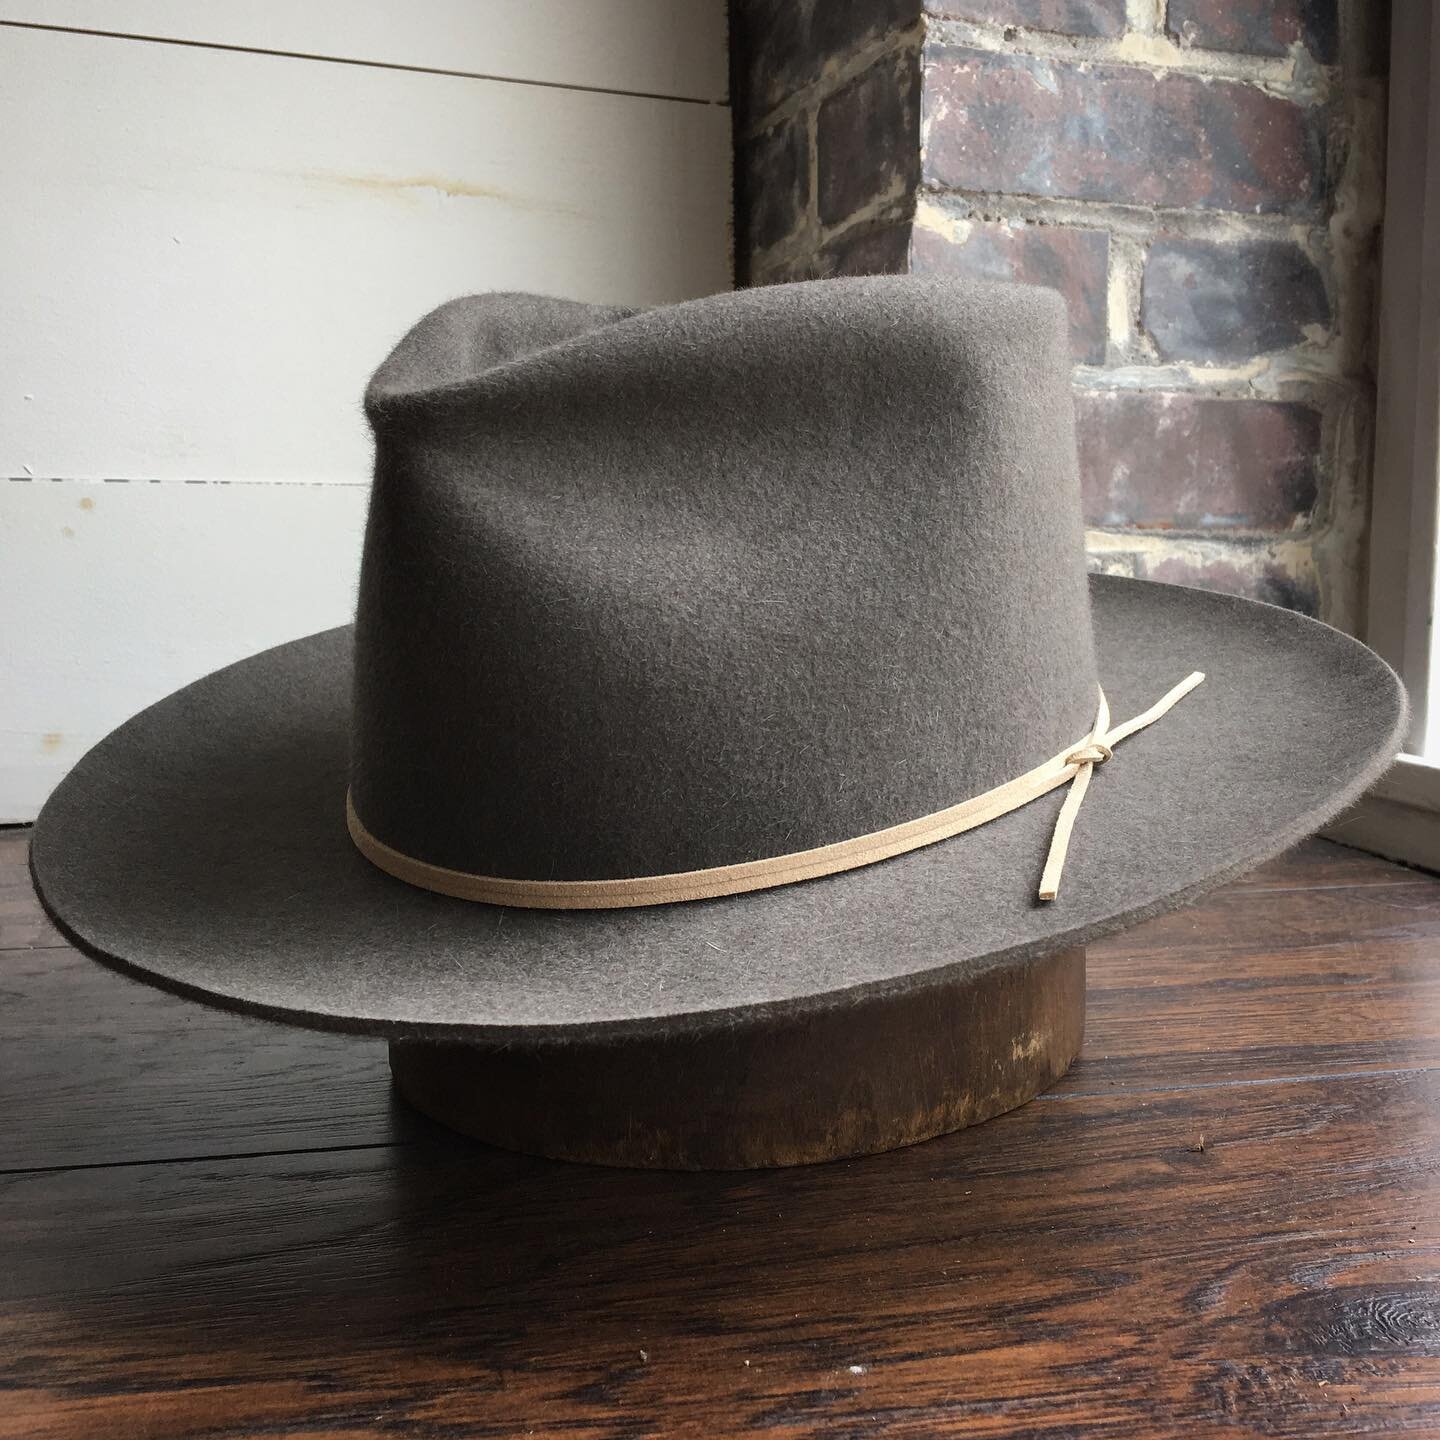  Granite, dress weight, pure beaver.  Low teardrop crown.  2 3/4” flanged brim.  Cream leather outer. 